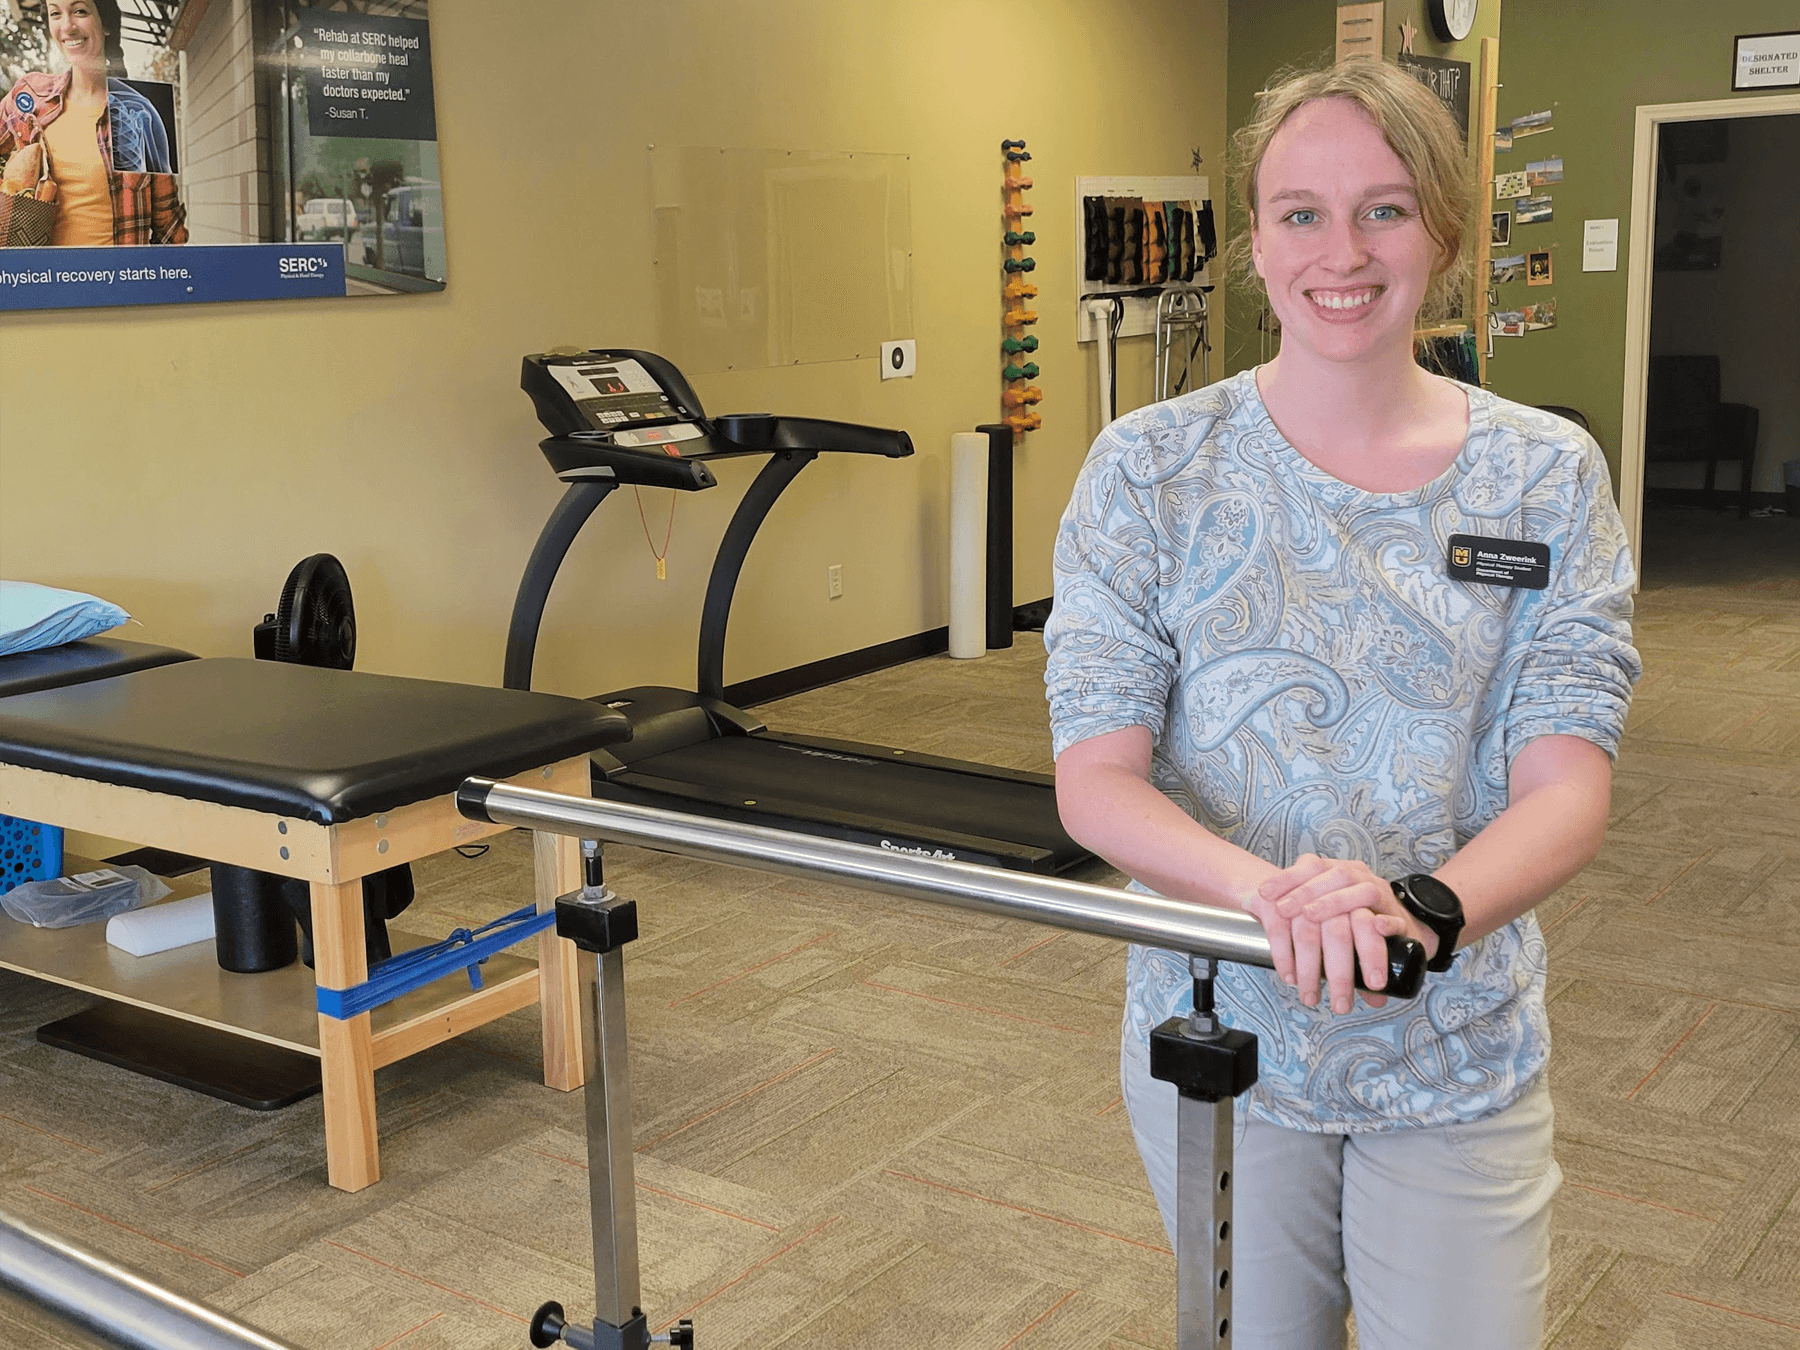 The Research Foundation awards $37,000 in scholarships to regional physical therapy students